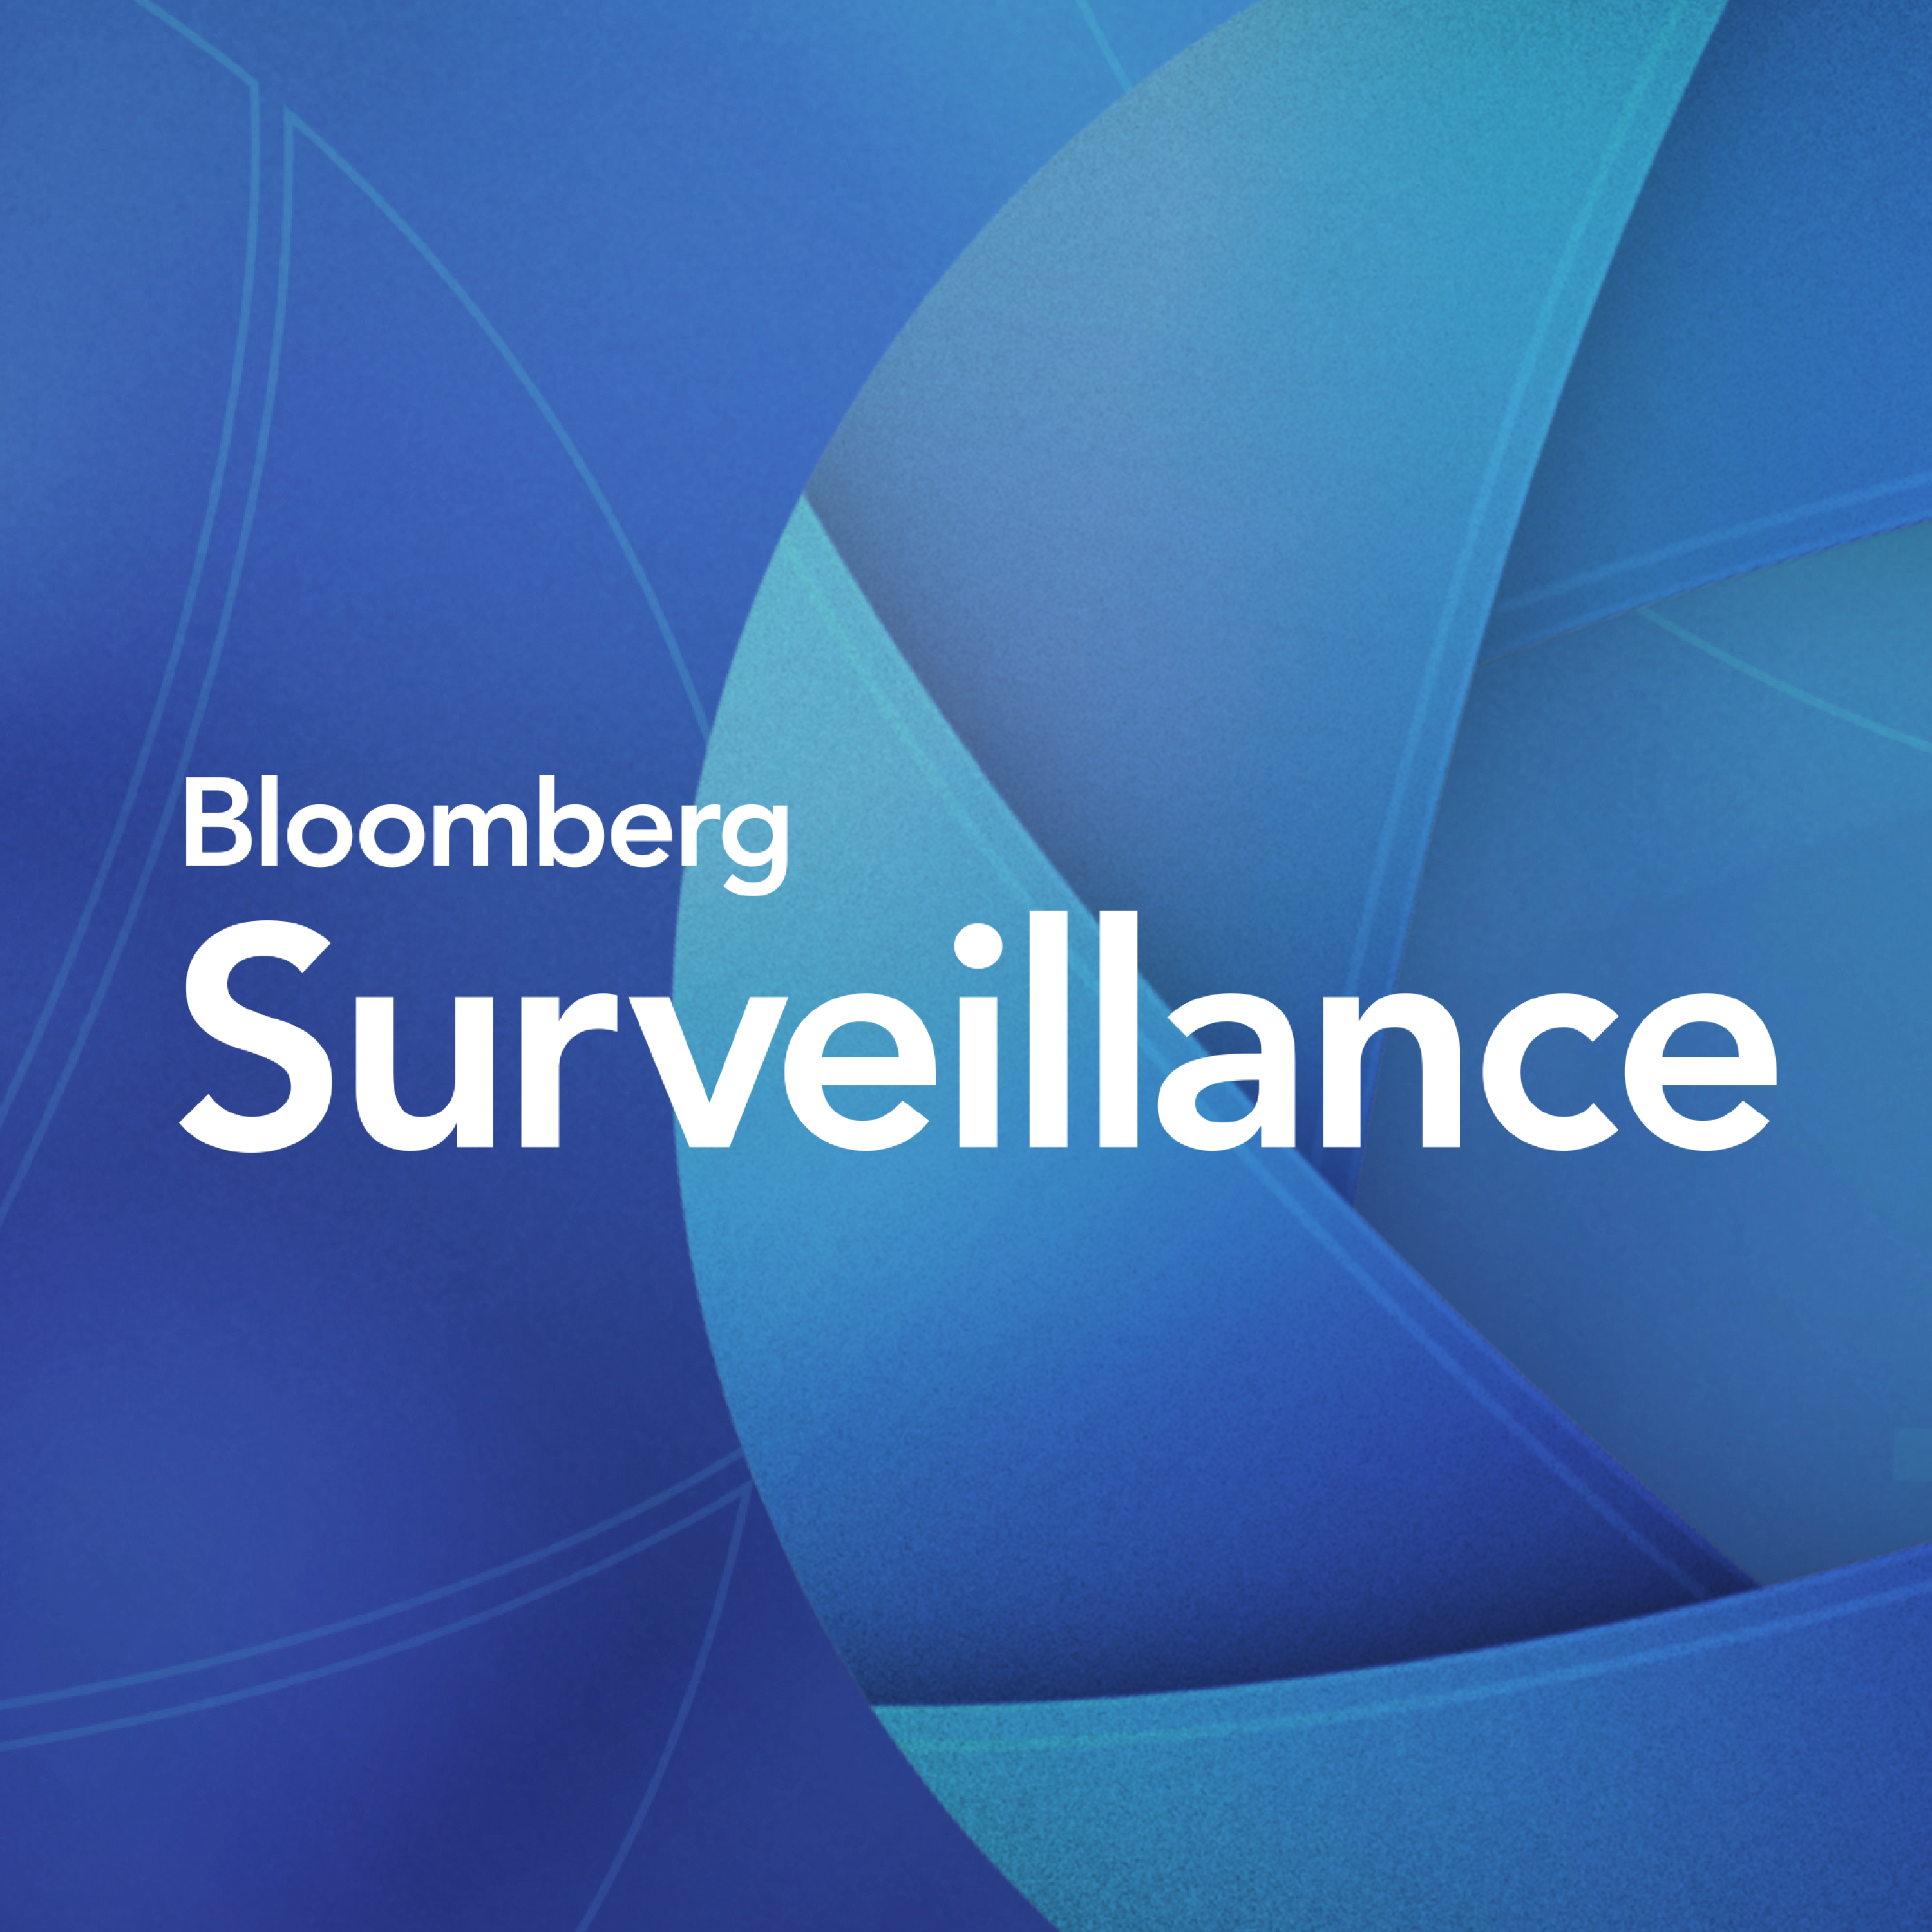 Surveillance: Fed’s Mester Says Policy in Good